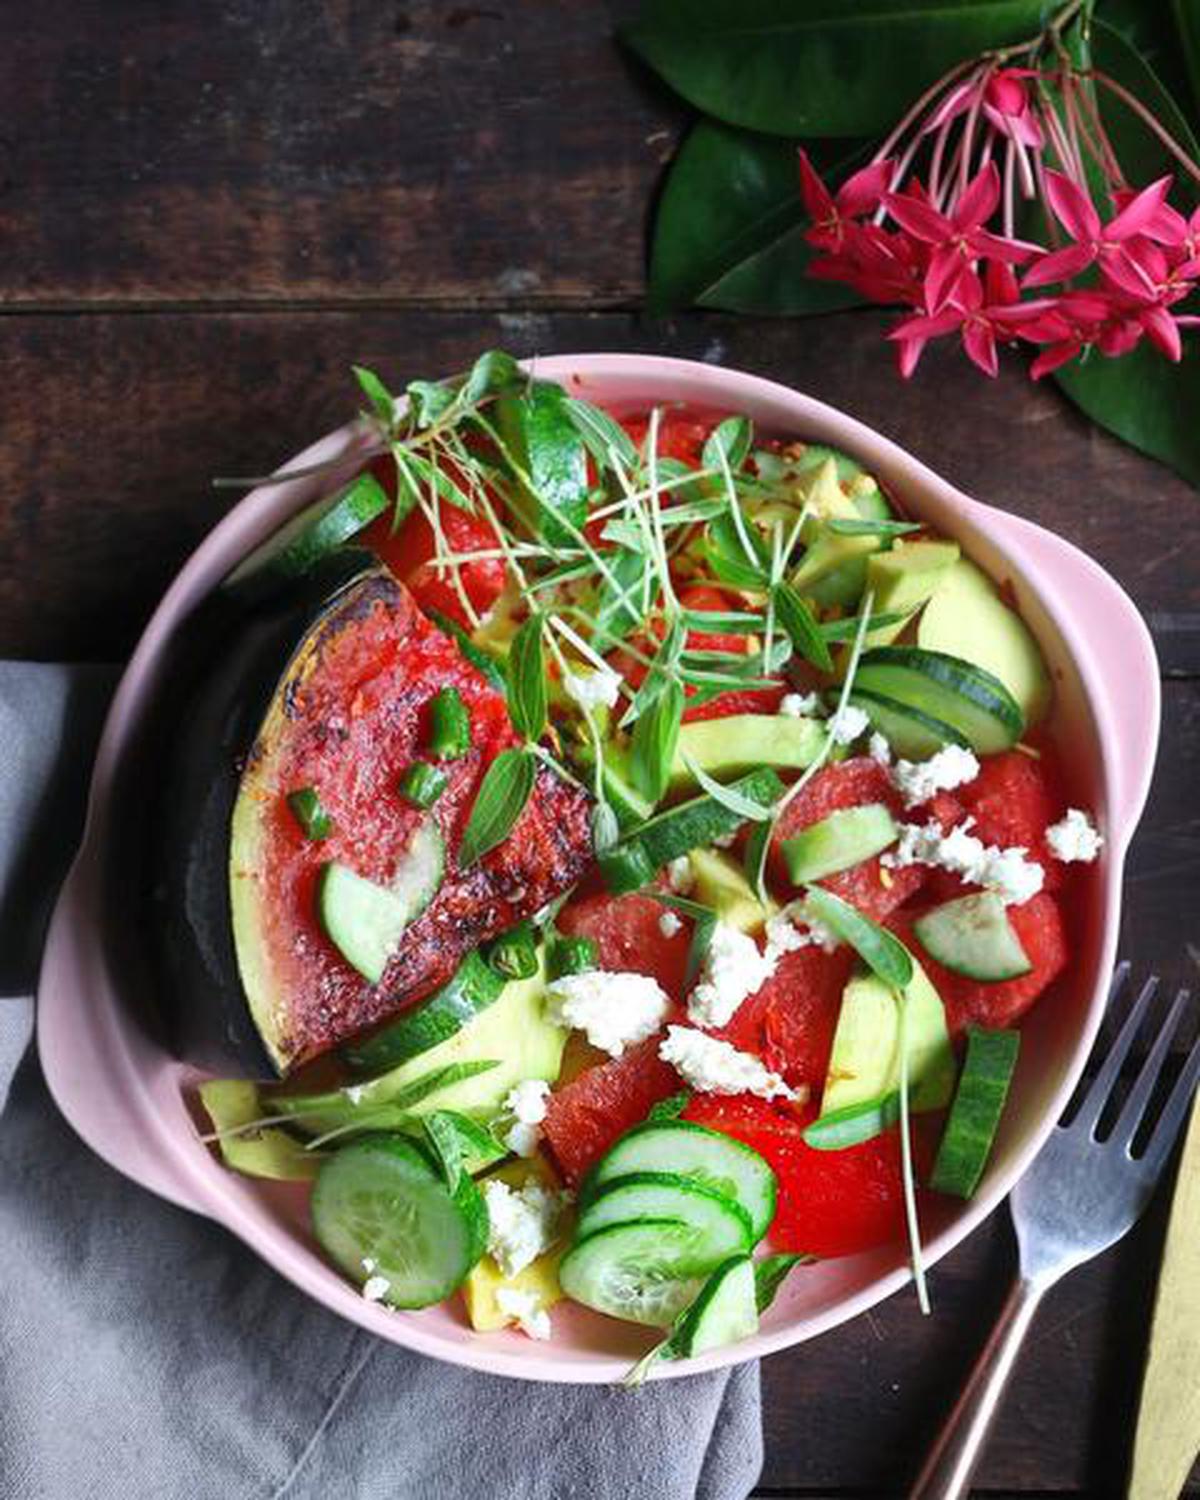 Grilled watermelon avocado salad with micro greens photographed by Swayampurna Mishra